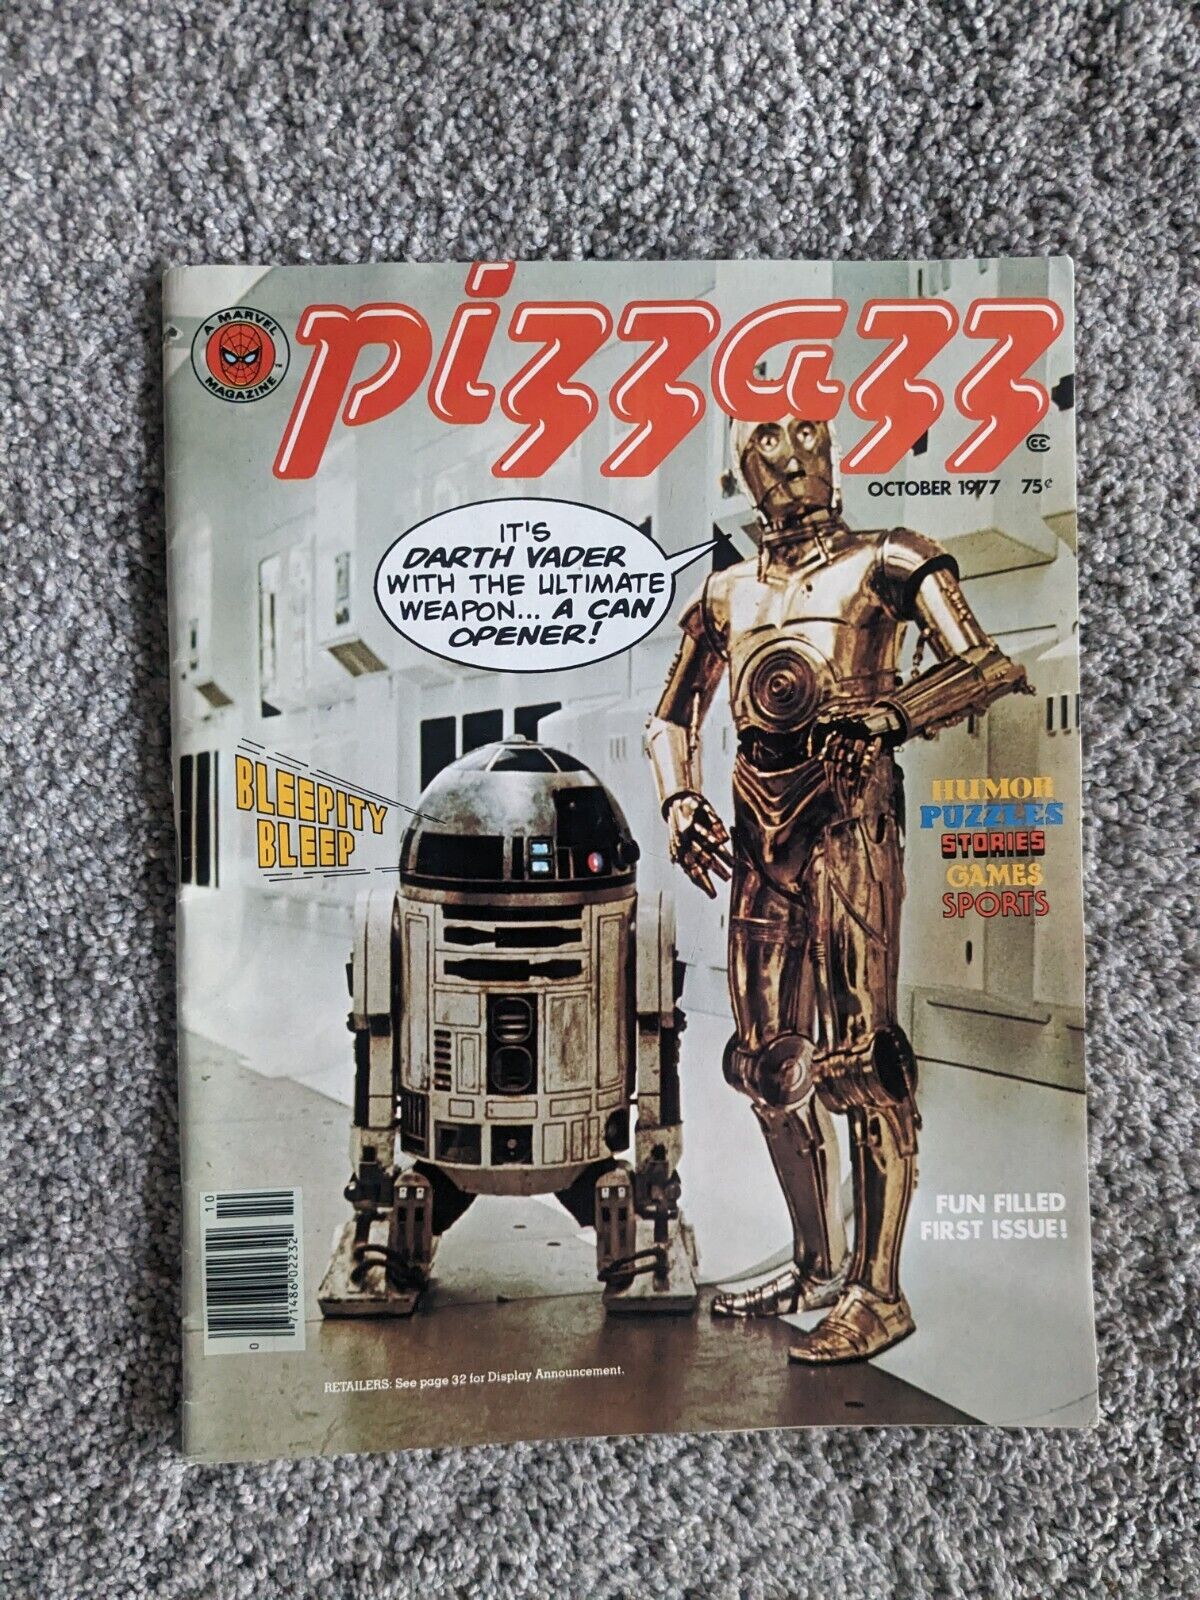 PIZZAZZ October 1977 Marvel Magazine Star Wars  w/poster & iron on inserts